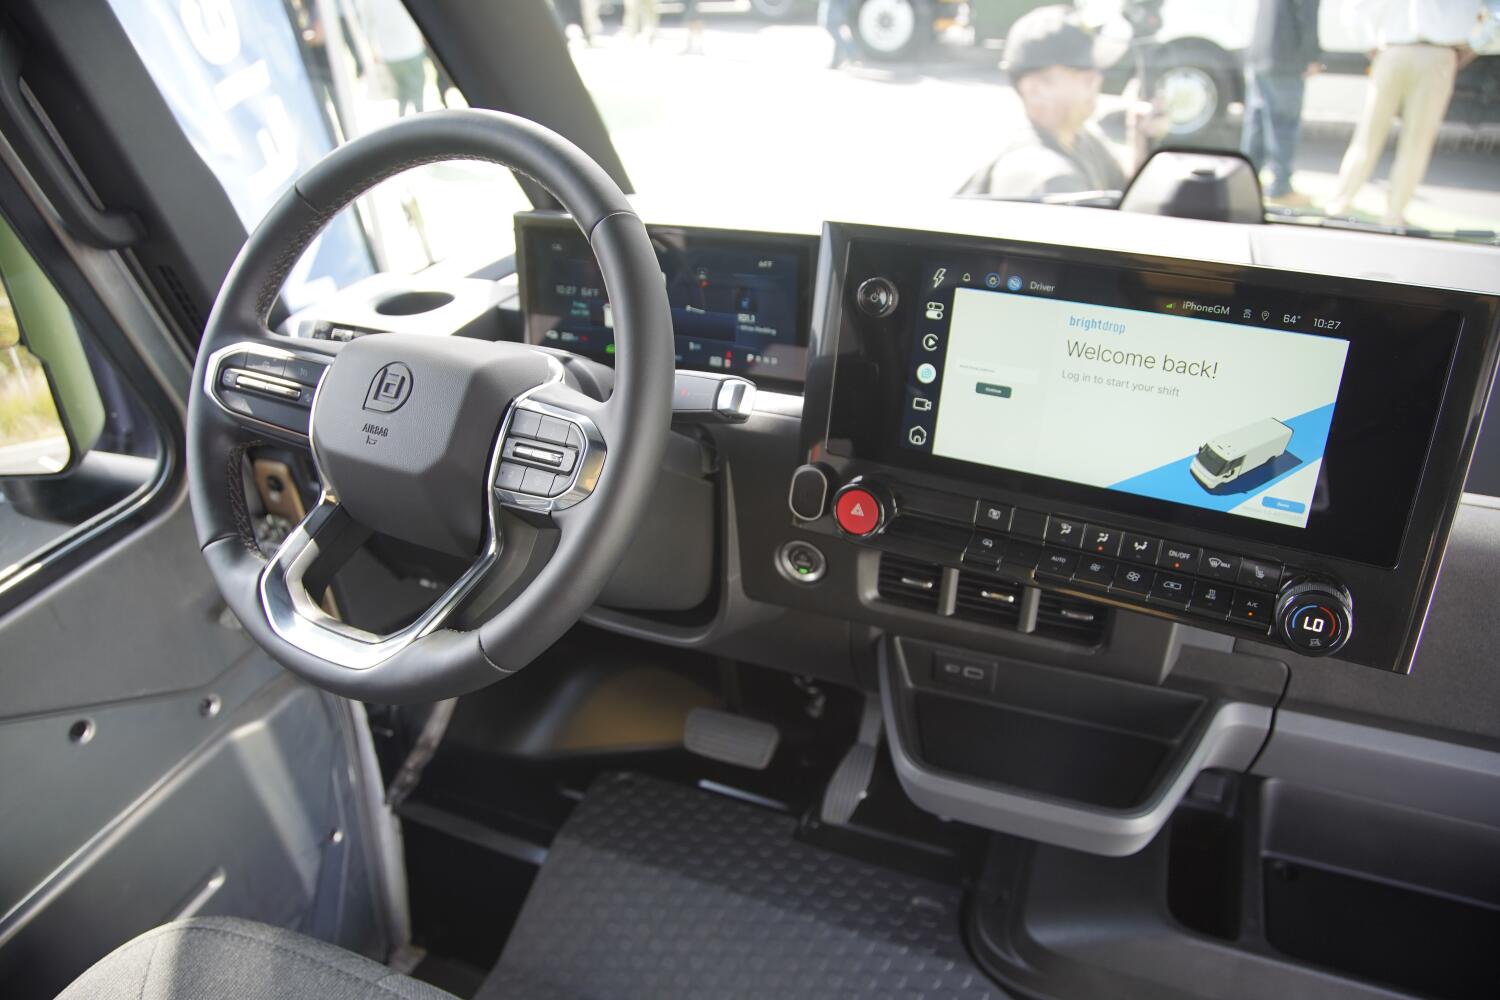 The driver's cab inside the Brightdrop all-electric Zevo 600